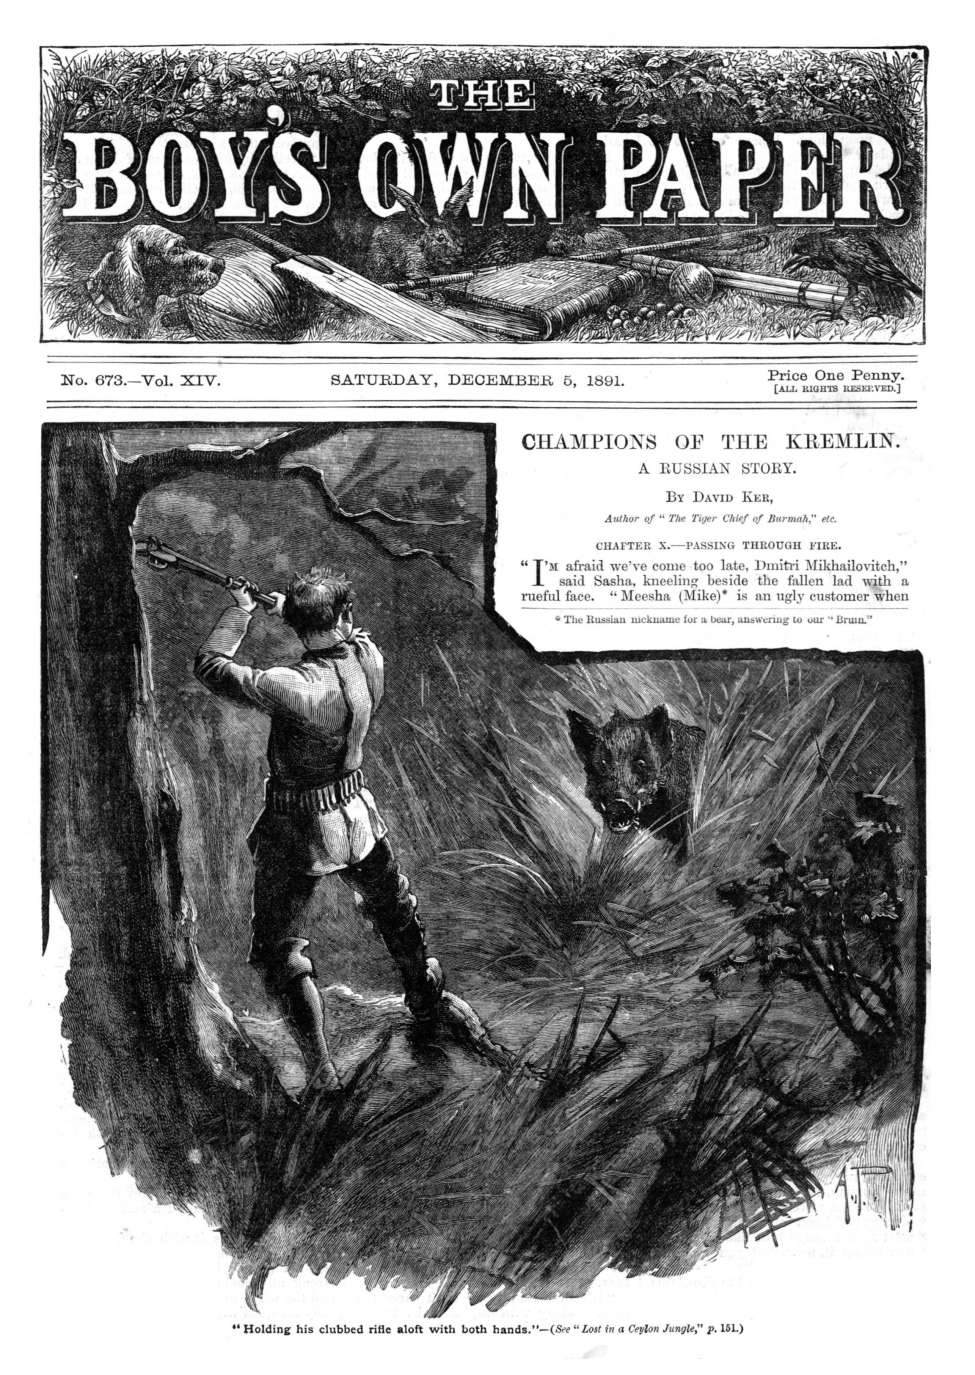 Comic Book Cover For The Boy's Own Paper v14 673